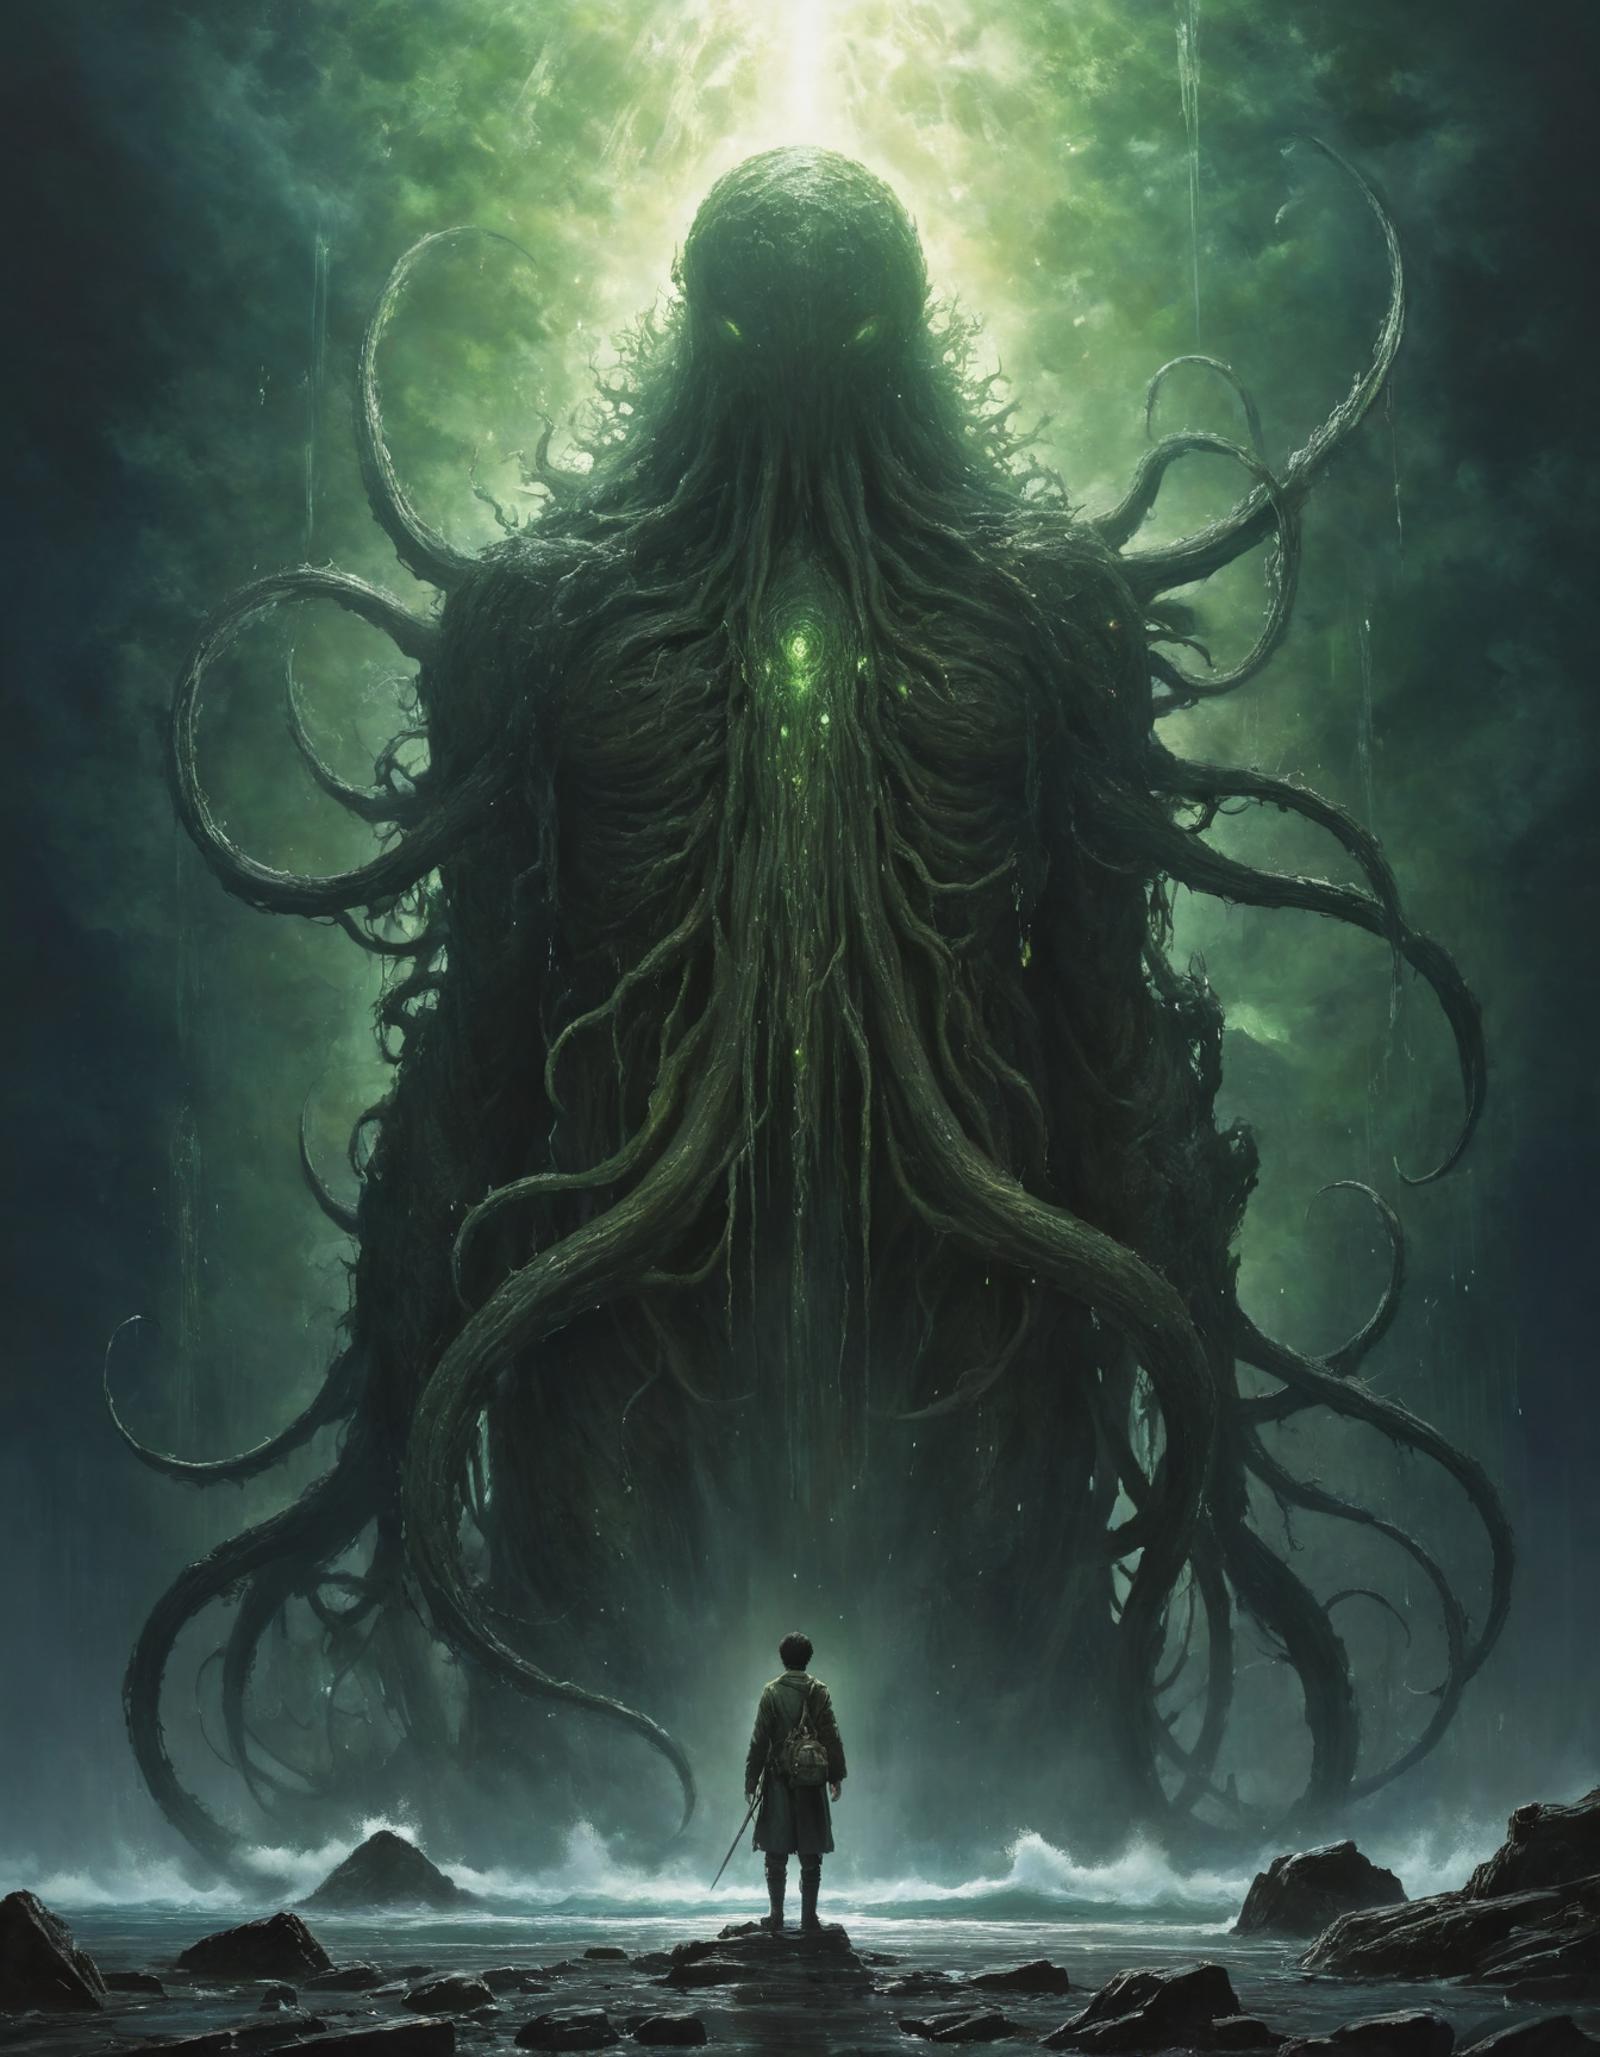 A person standing in front of a massive, glowing monster with many tentacles and a green background.